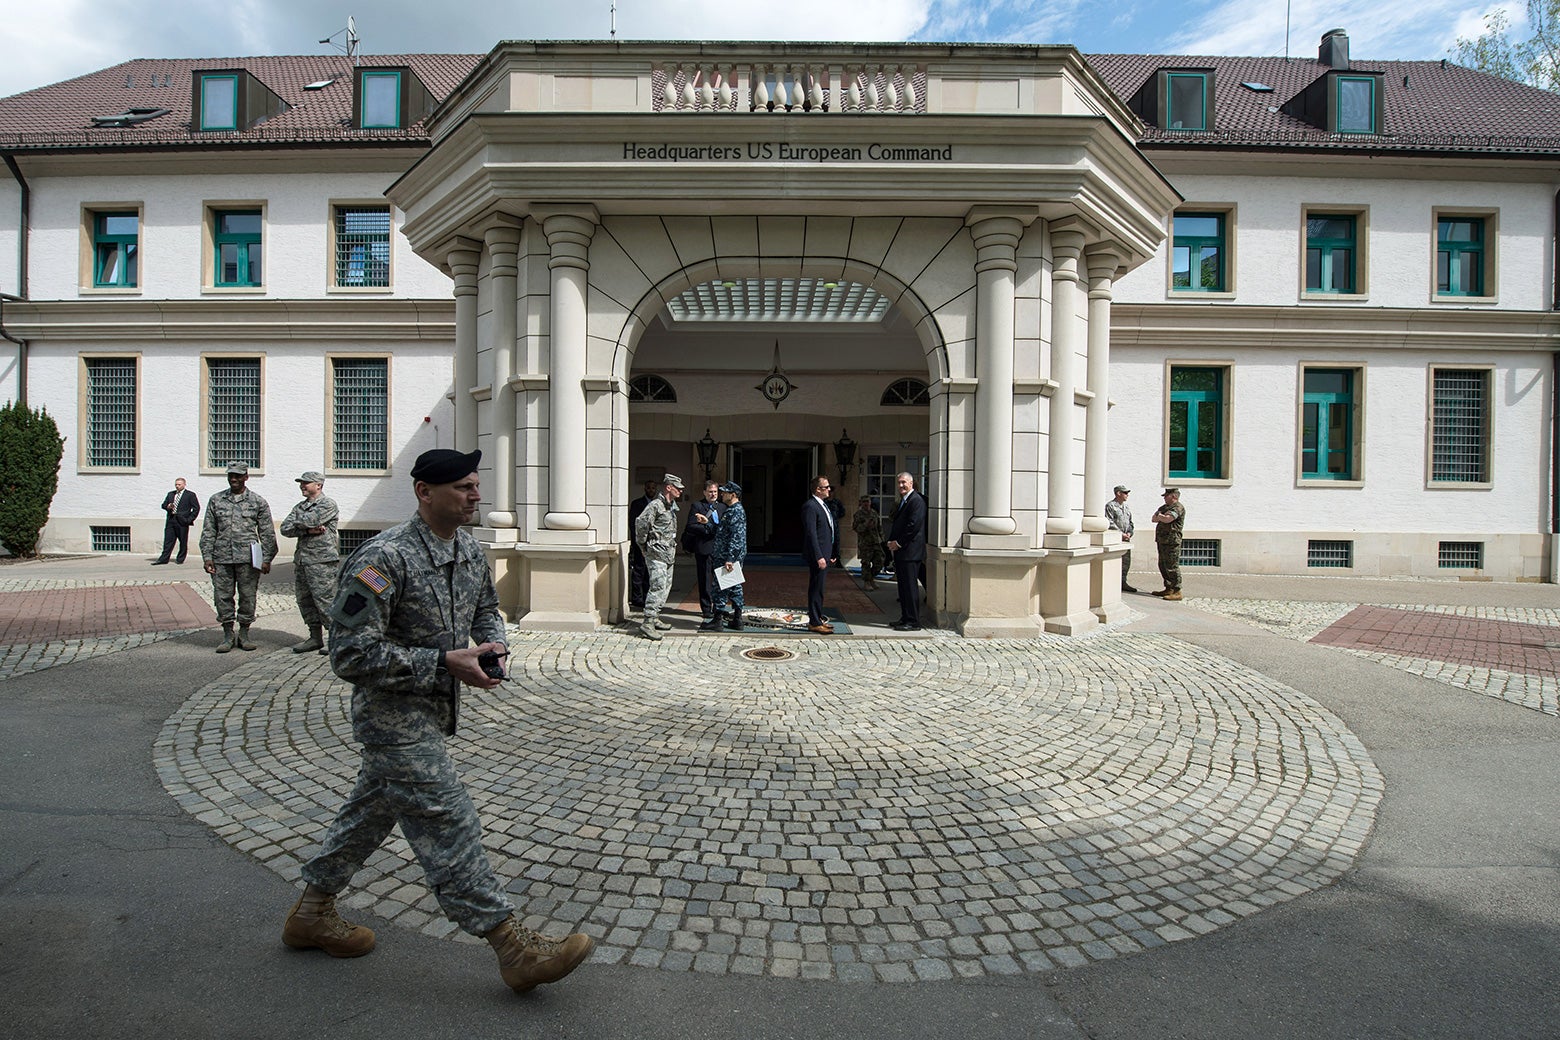 Members of the U.S. Armed Forces walk past a headquarters in Germany.